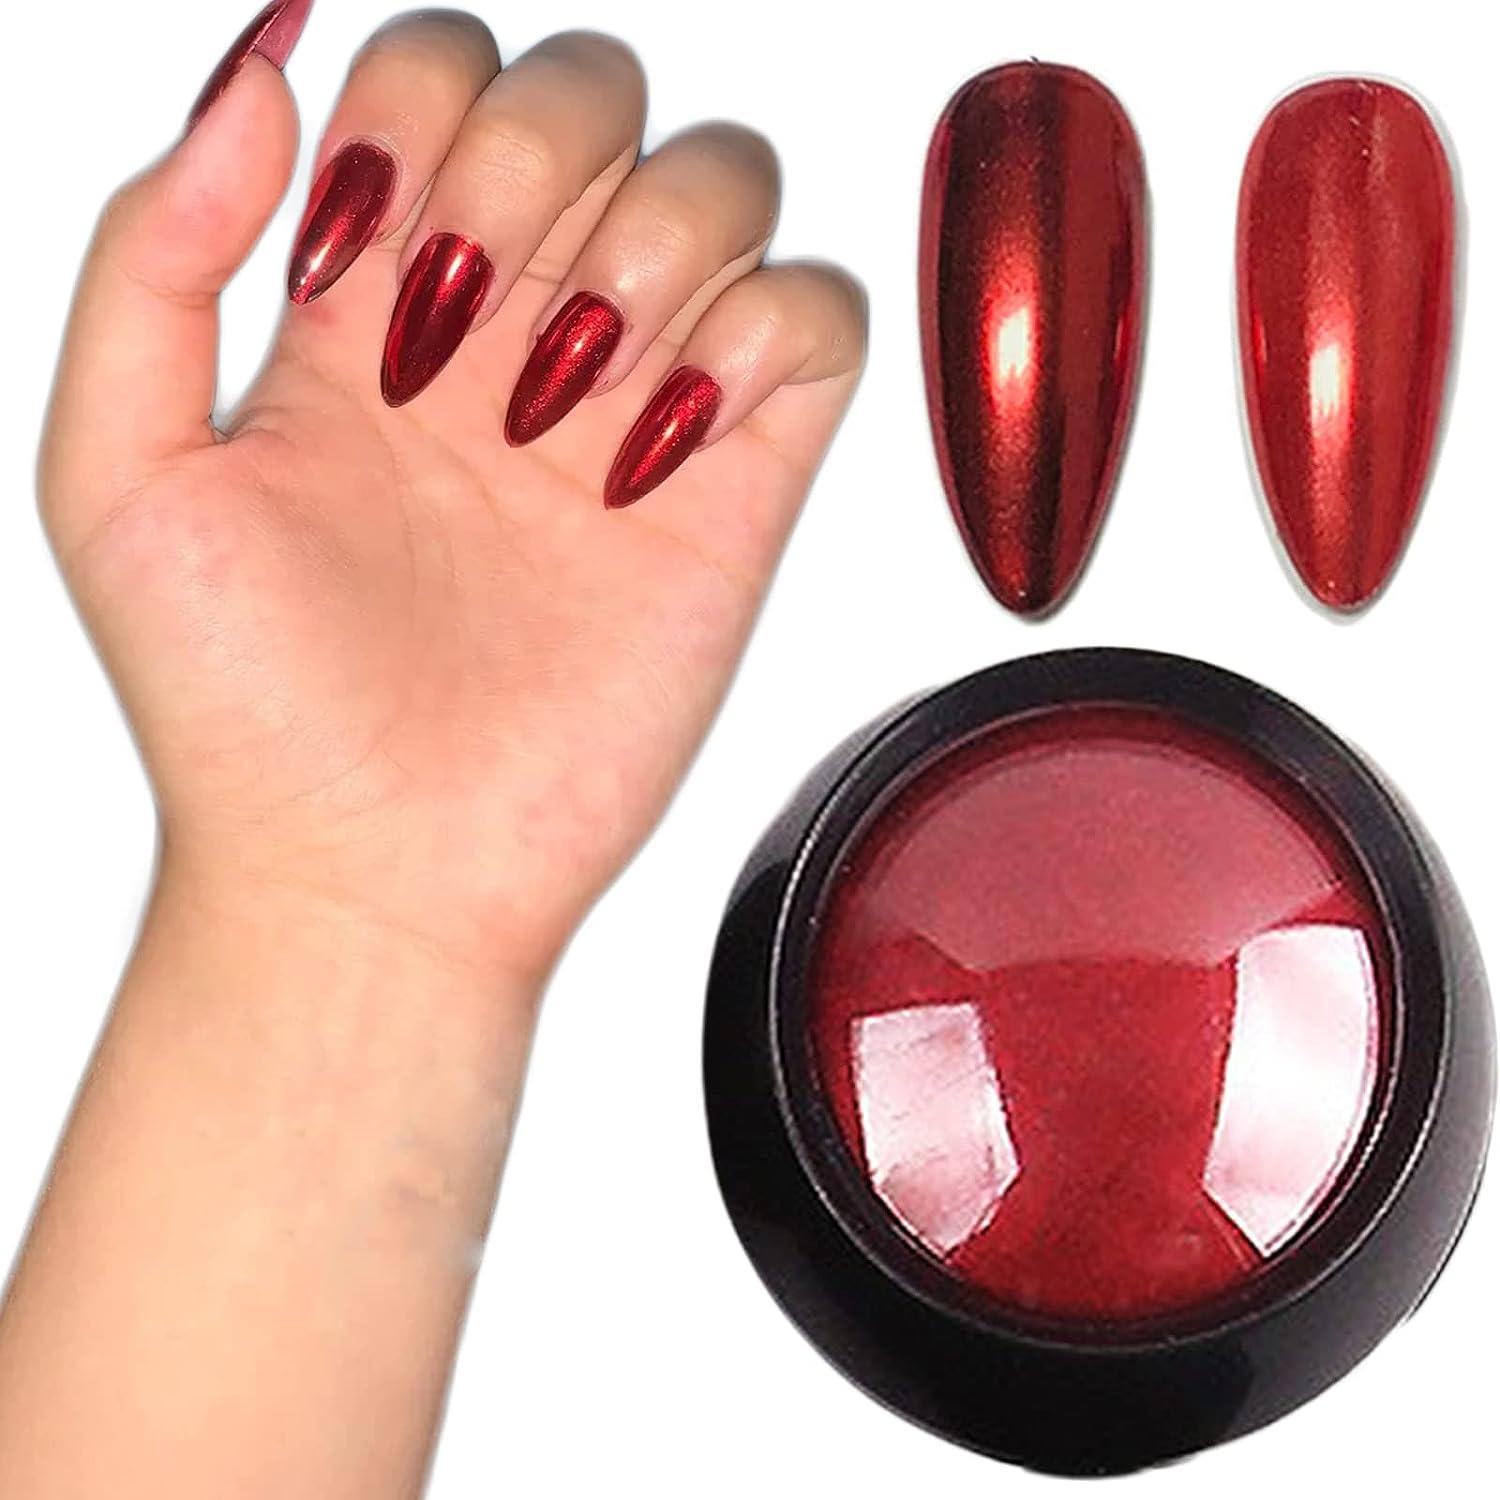  2 Boxes Red Chrome Nail Powder, Red Black Gradient Mirror  Effect Aurora Magic Pearlescent Nail Powder Pigment, High Gloss Glitter  Nail Art, Holographic Chameleon Dust for Manicure Decoration : Beauty 